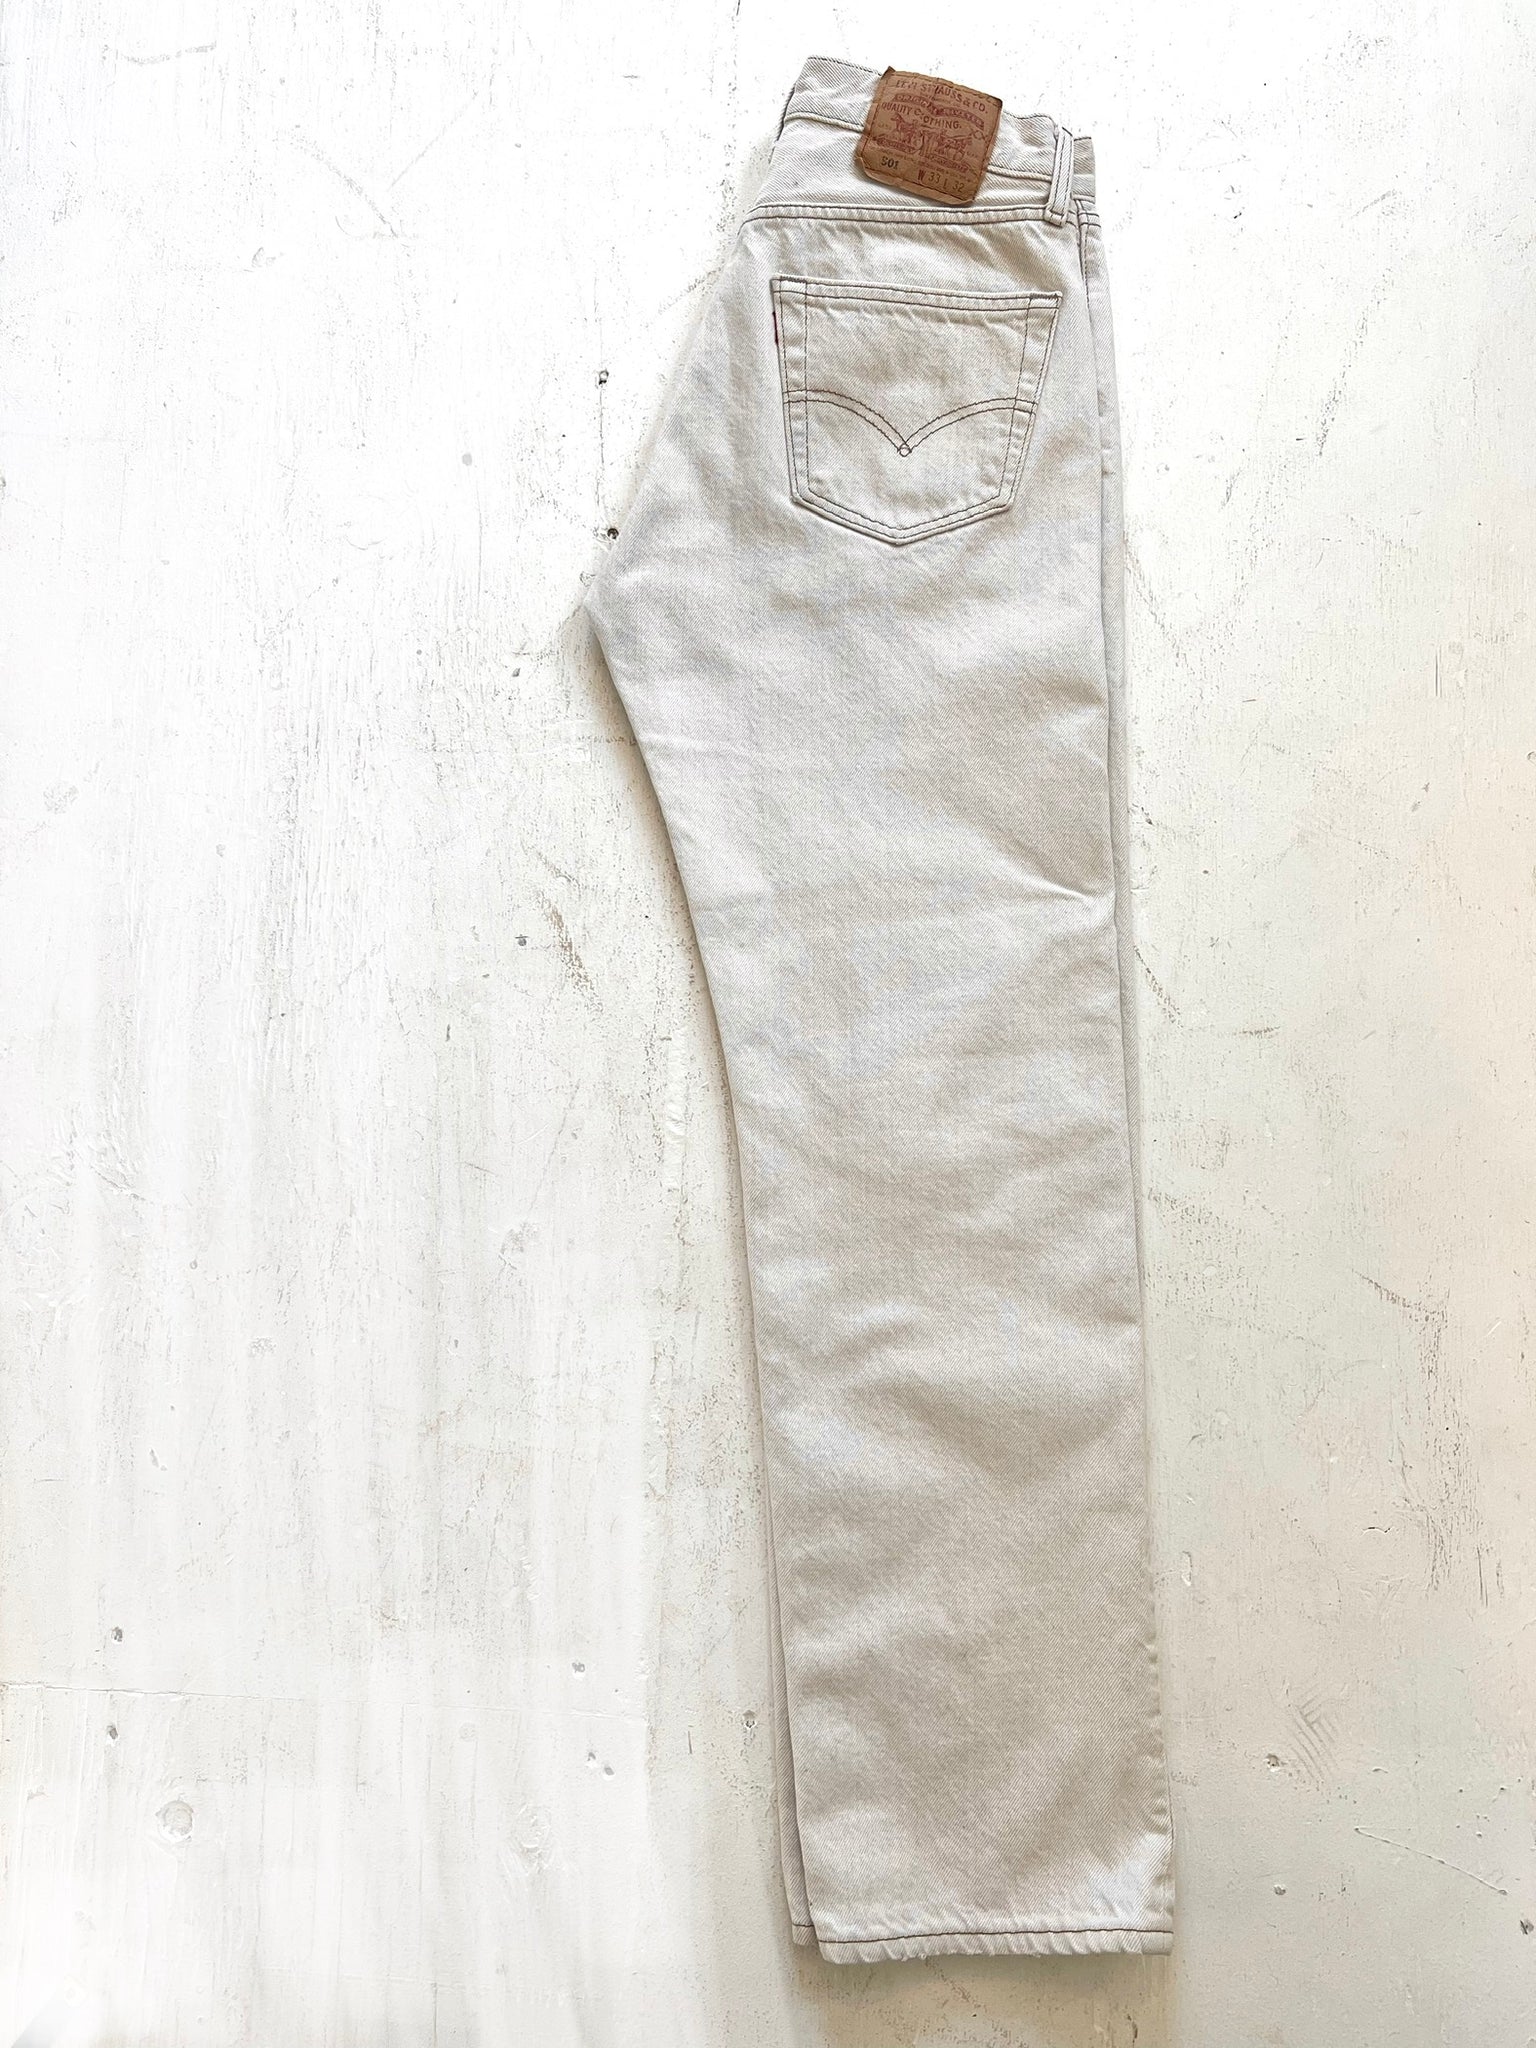 LEVI'S 501 Vintage White Button Fly Jeans 31 x31 – Chambers Vintage